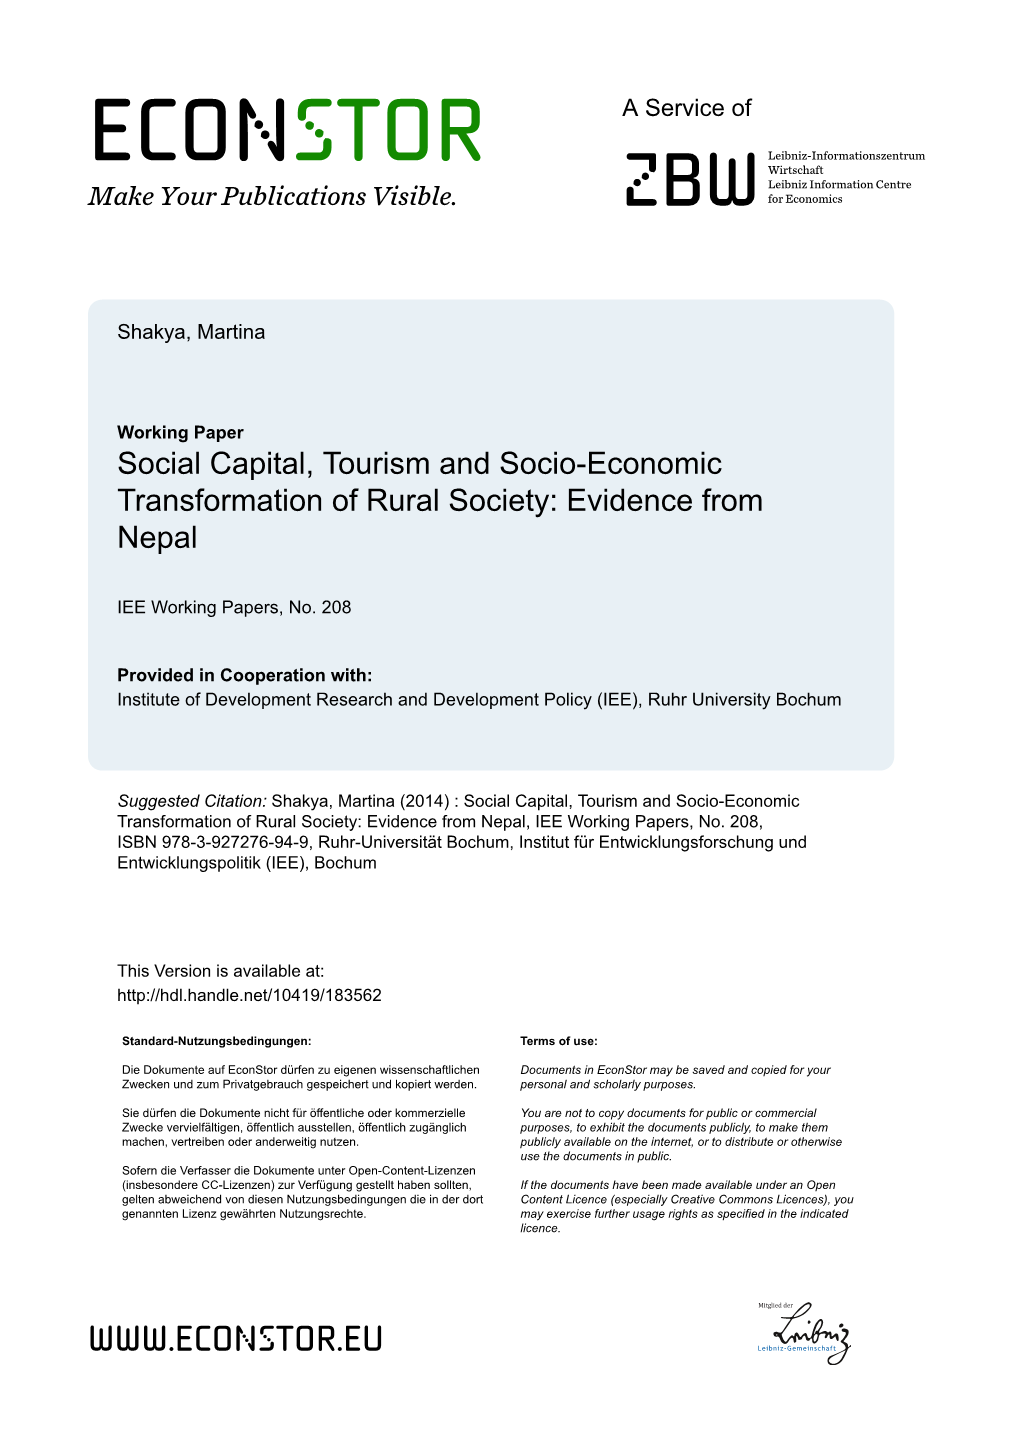 Social Capital, Tourism and Socio-Economic Transformation of Rural Society: Evidence from Nepal